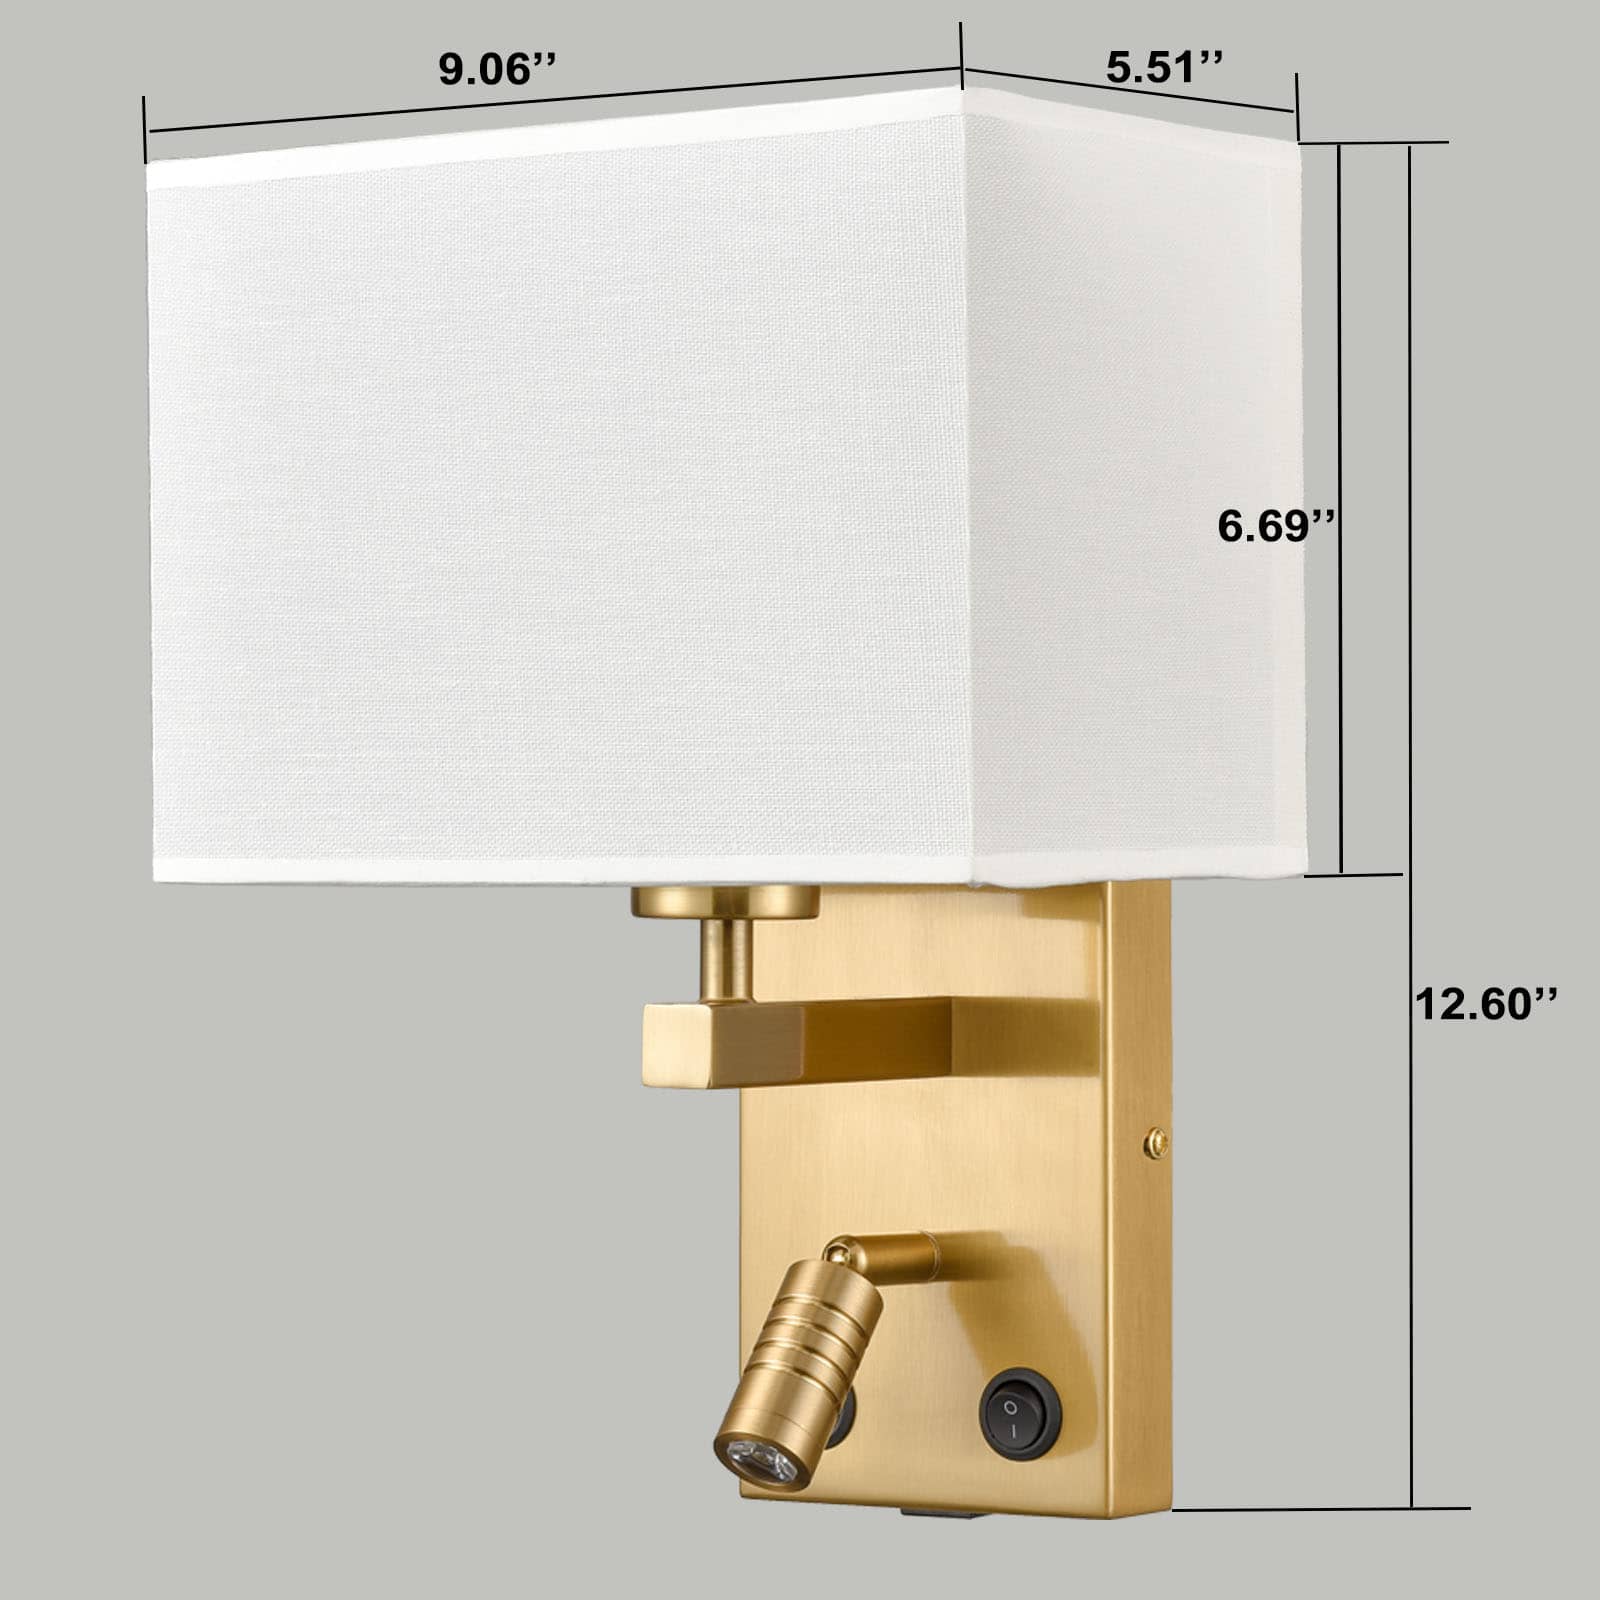 Modern Set of 2 Brass Gold with White Fabric Wall Sconce with USB Charging Port|Twin on/off Switch|LED Reading Light for bedroom